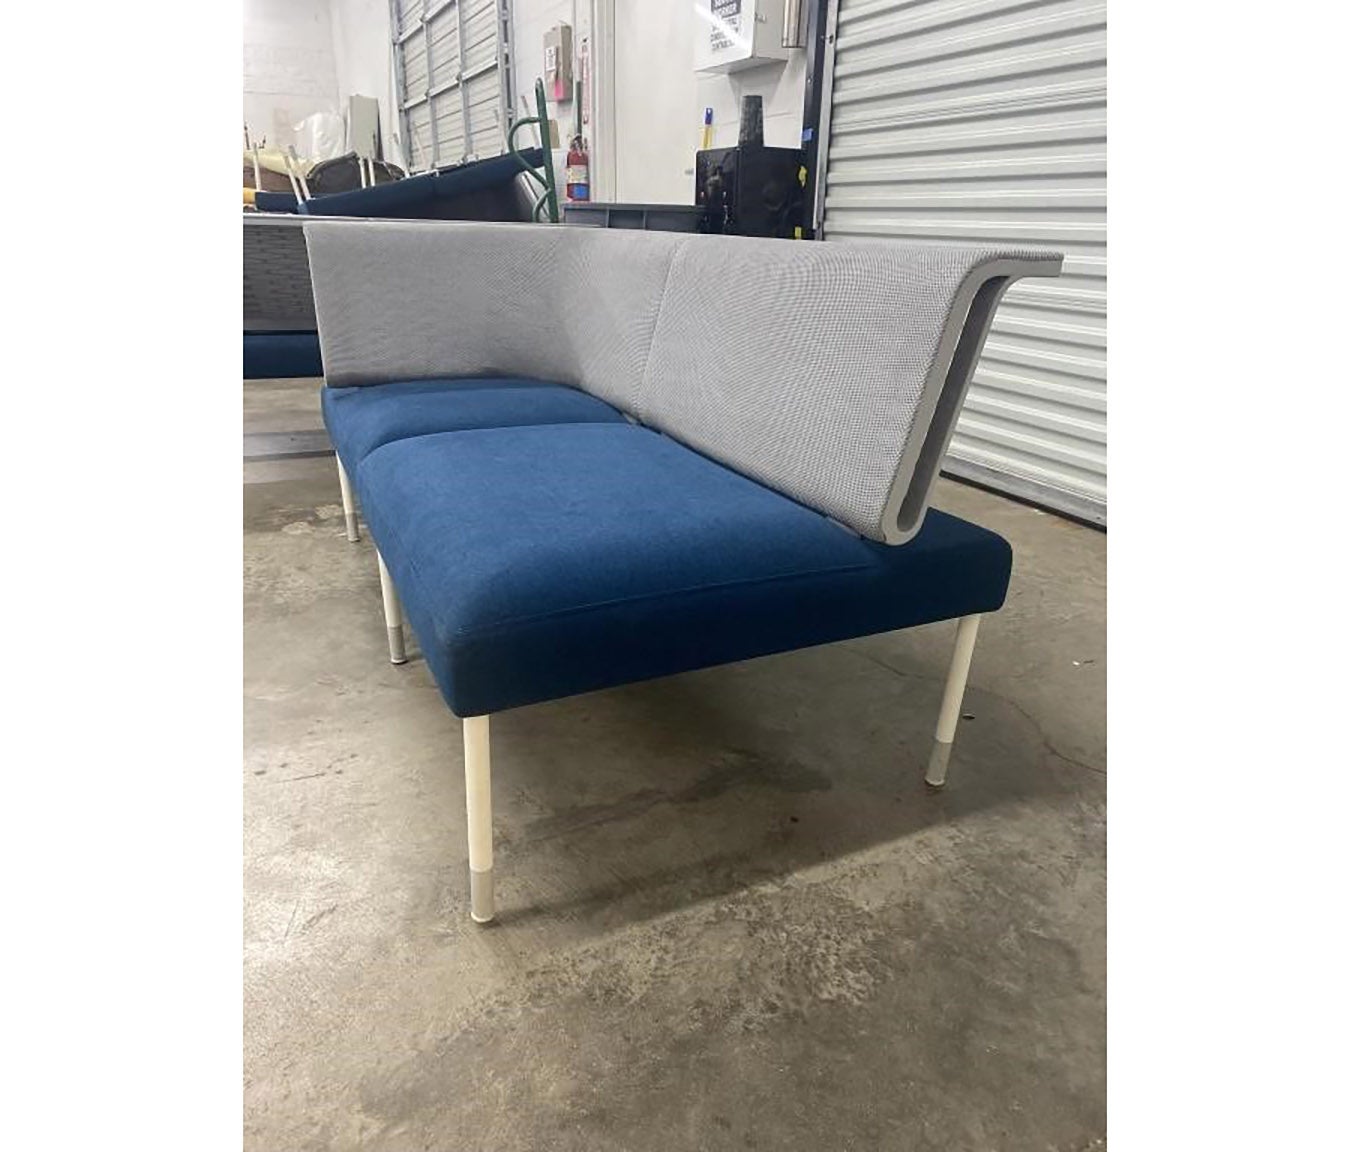 1 3 Piece Landscape Multi Section Sofa by Yves Behar for Herman Miller 6 Pieces In Good Condition For Sale In Pasadena, TX